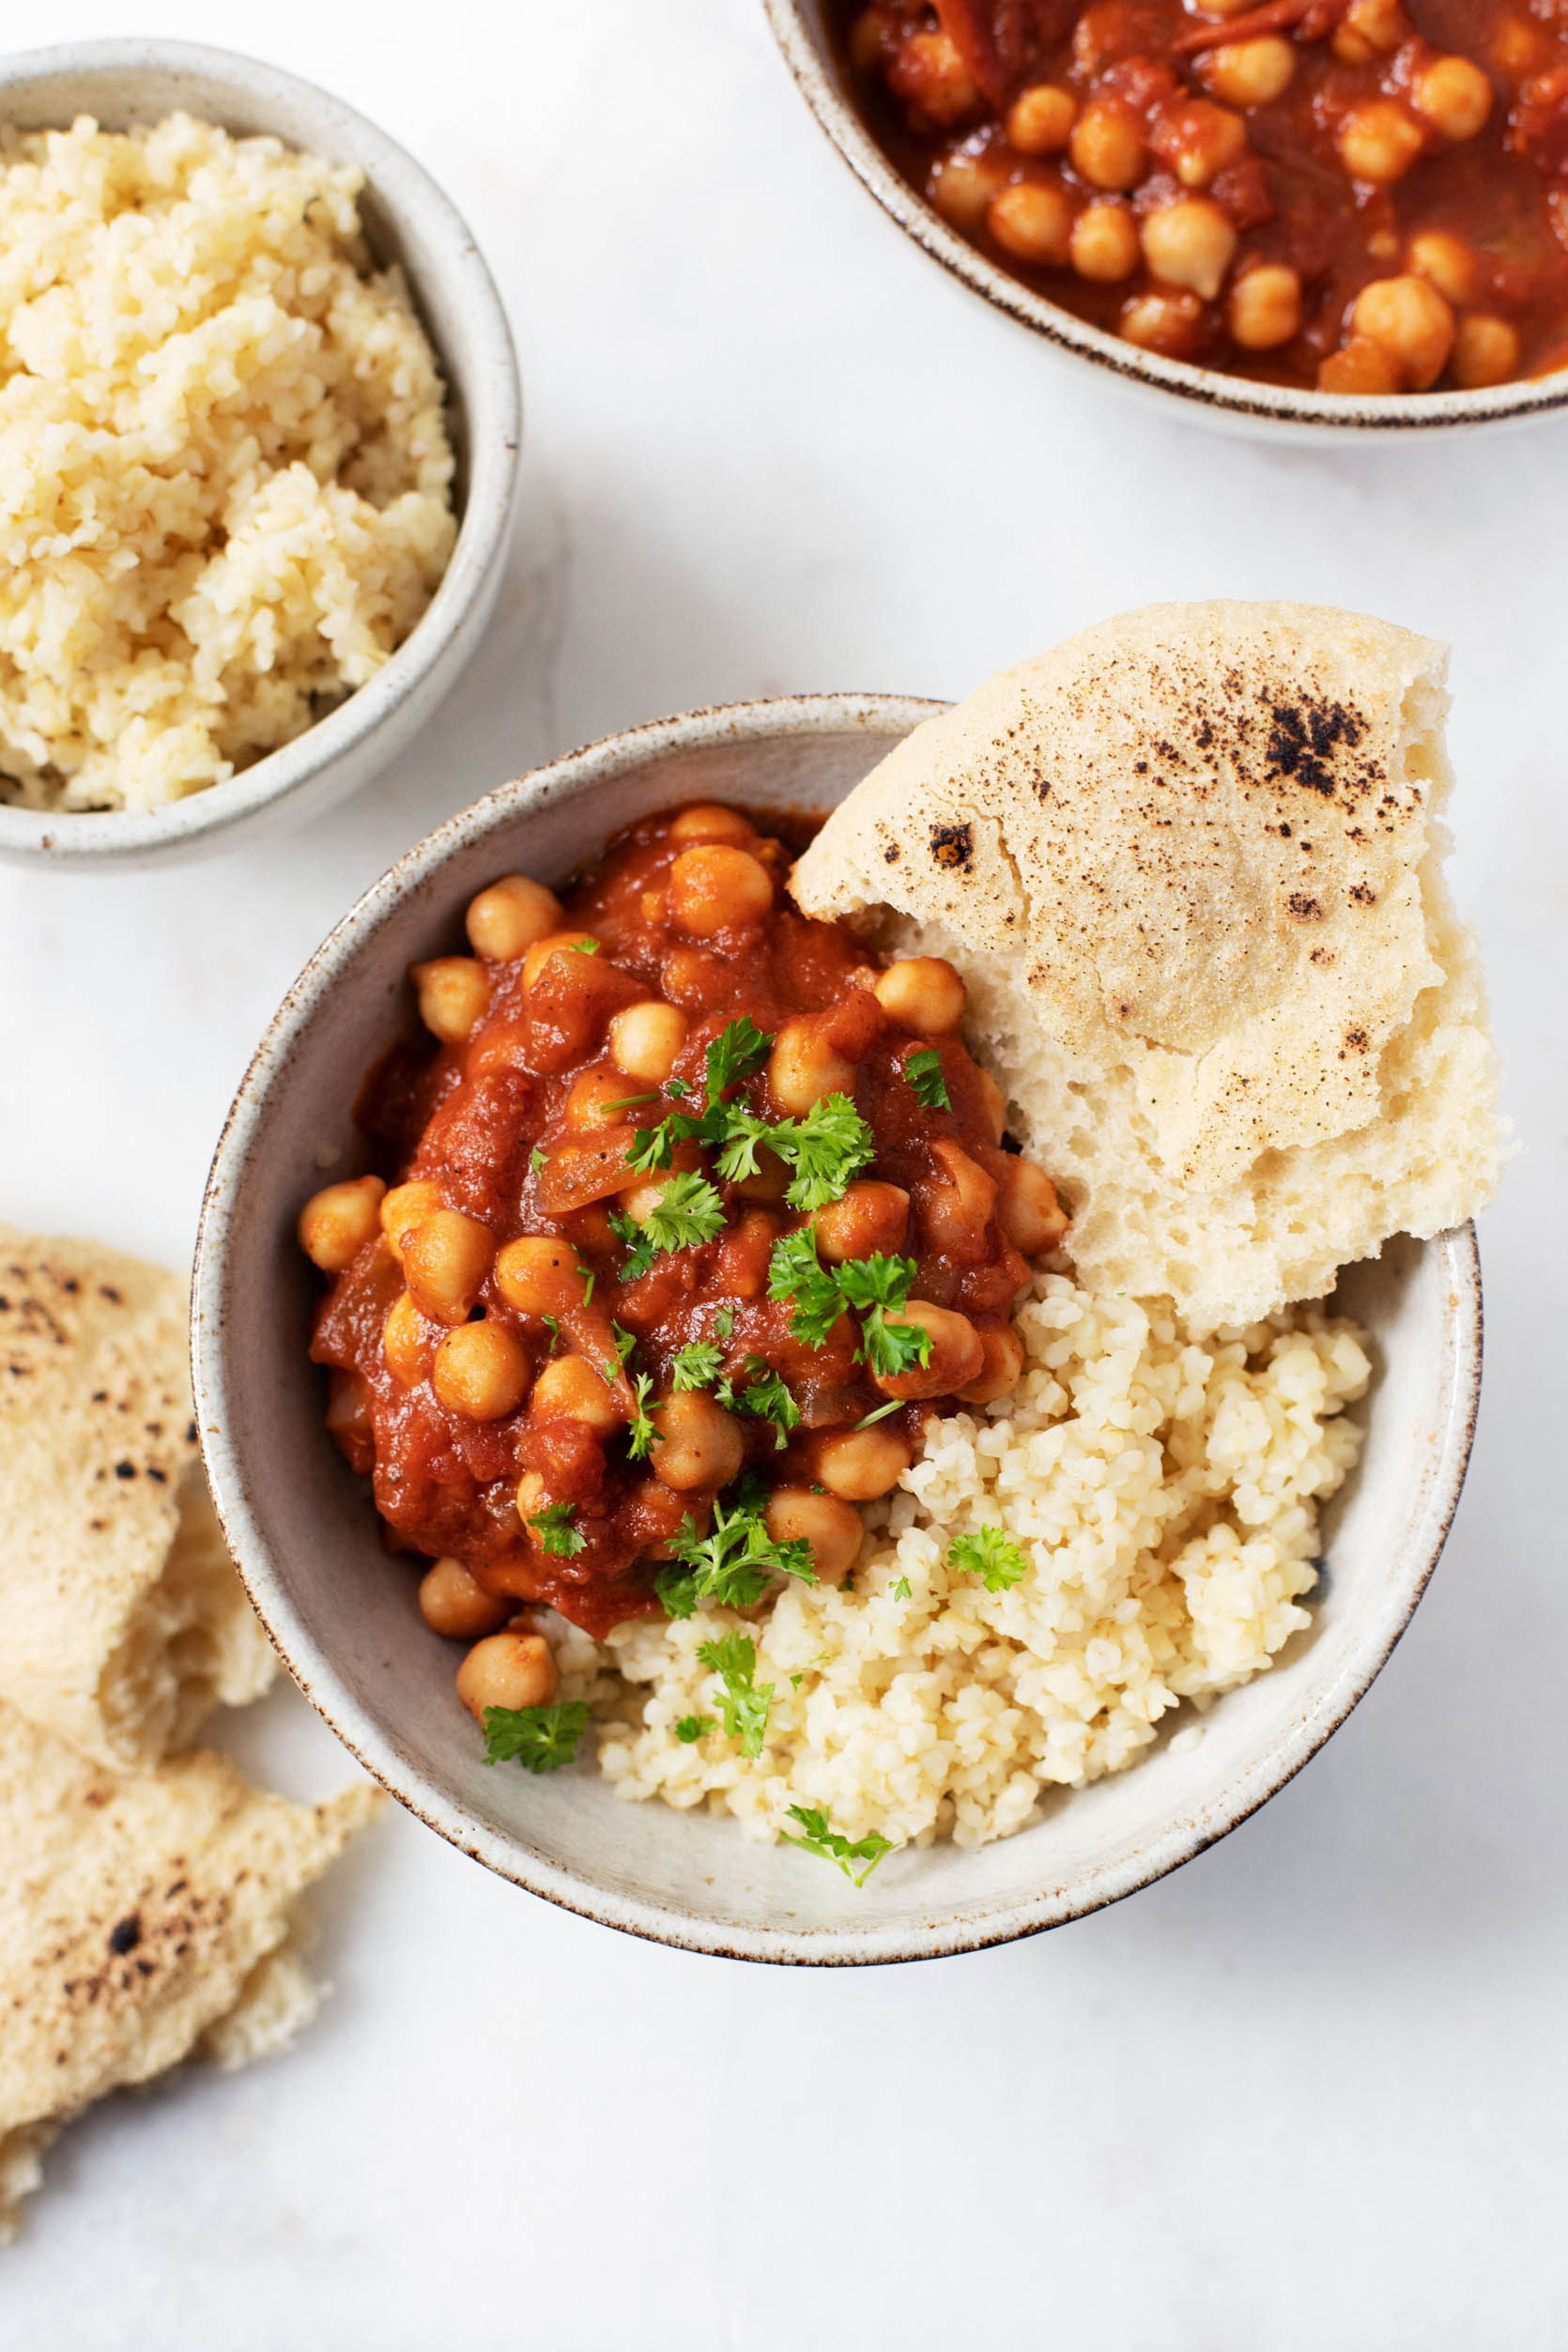 Moroccan Chickpea Tomato Stew | The Full Helping